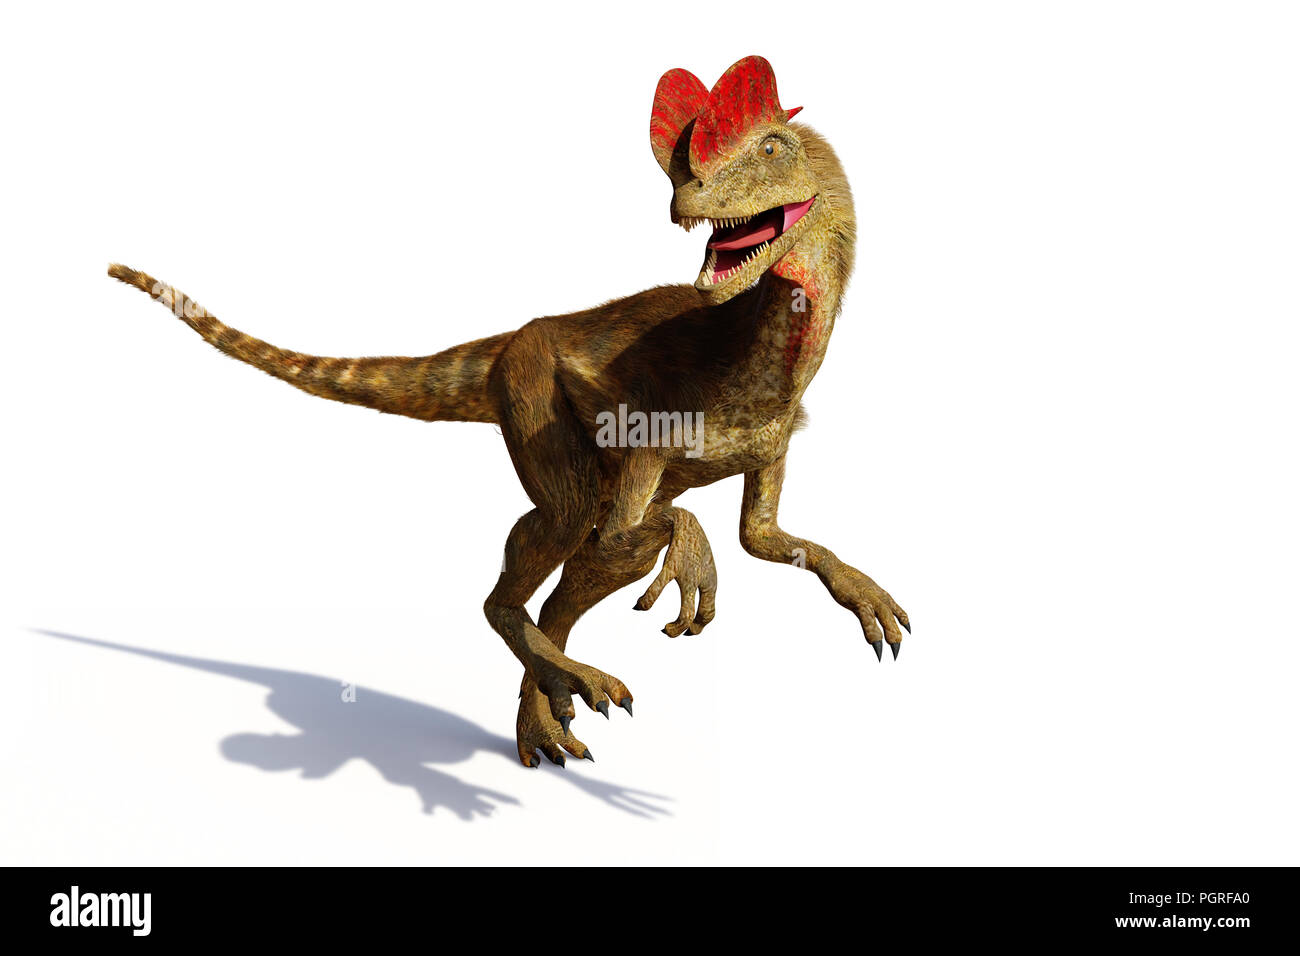 Dilophosaurus, theropod dinosaur from the Early Jurassic period (3d illustration isolated with shadow on white background) Stock Photo